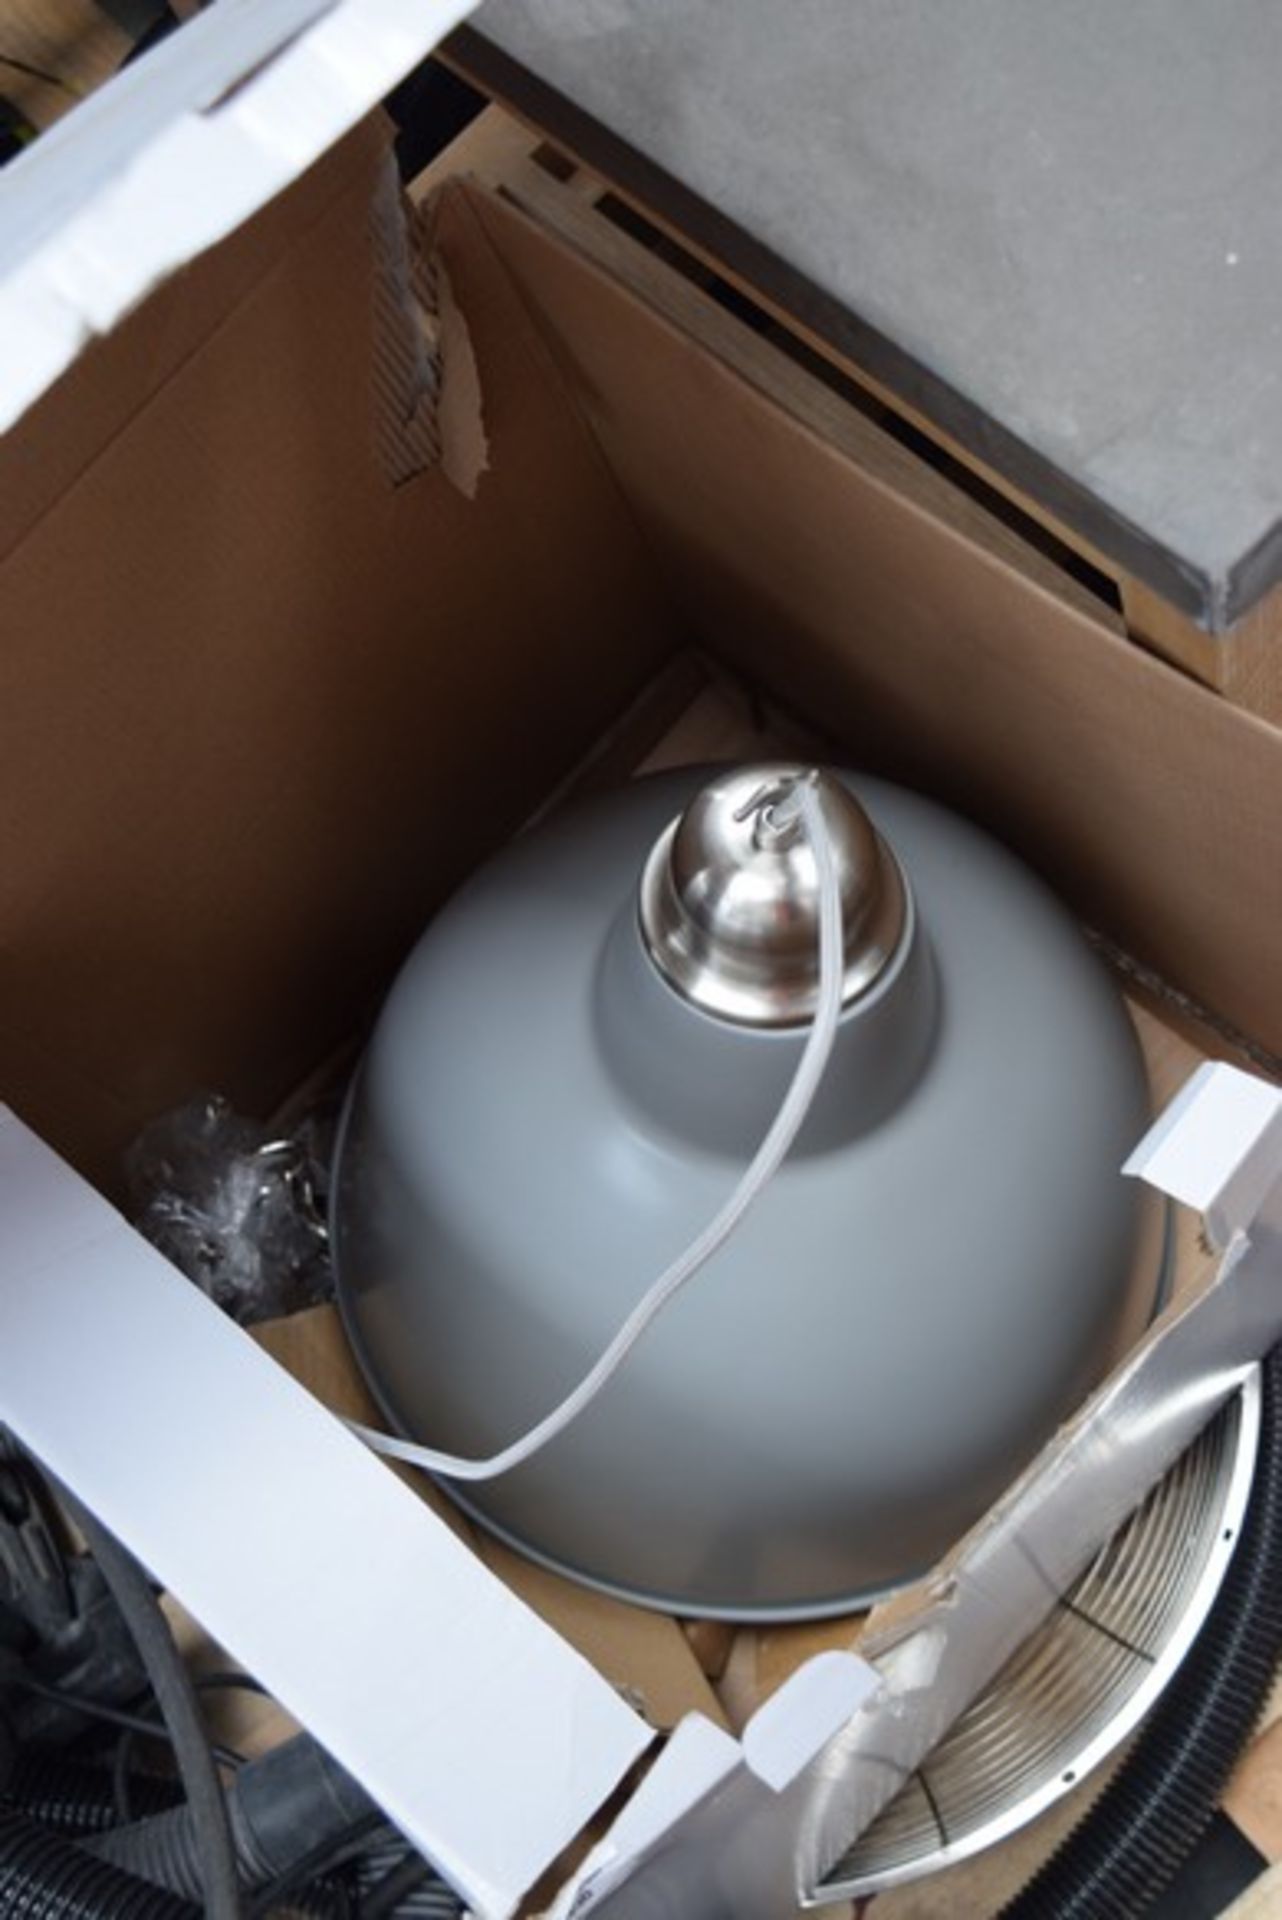 1 x CROFT COLLECTION AIDEN FACTORY CEILING LIGHT IN GREY RRP £80 21.04.17 *PLEASE NOTE THAT THE